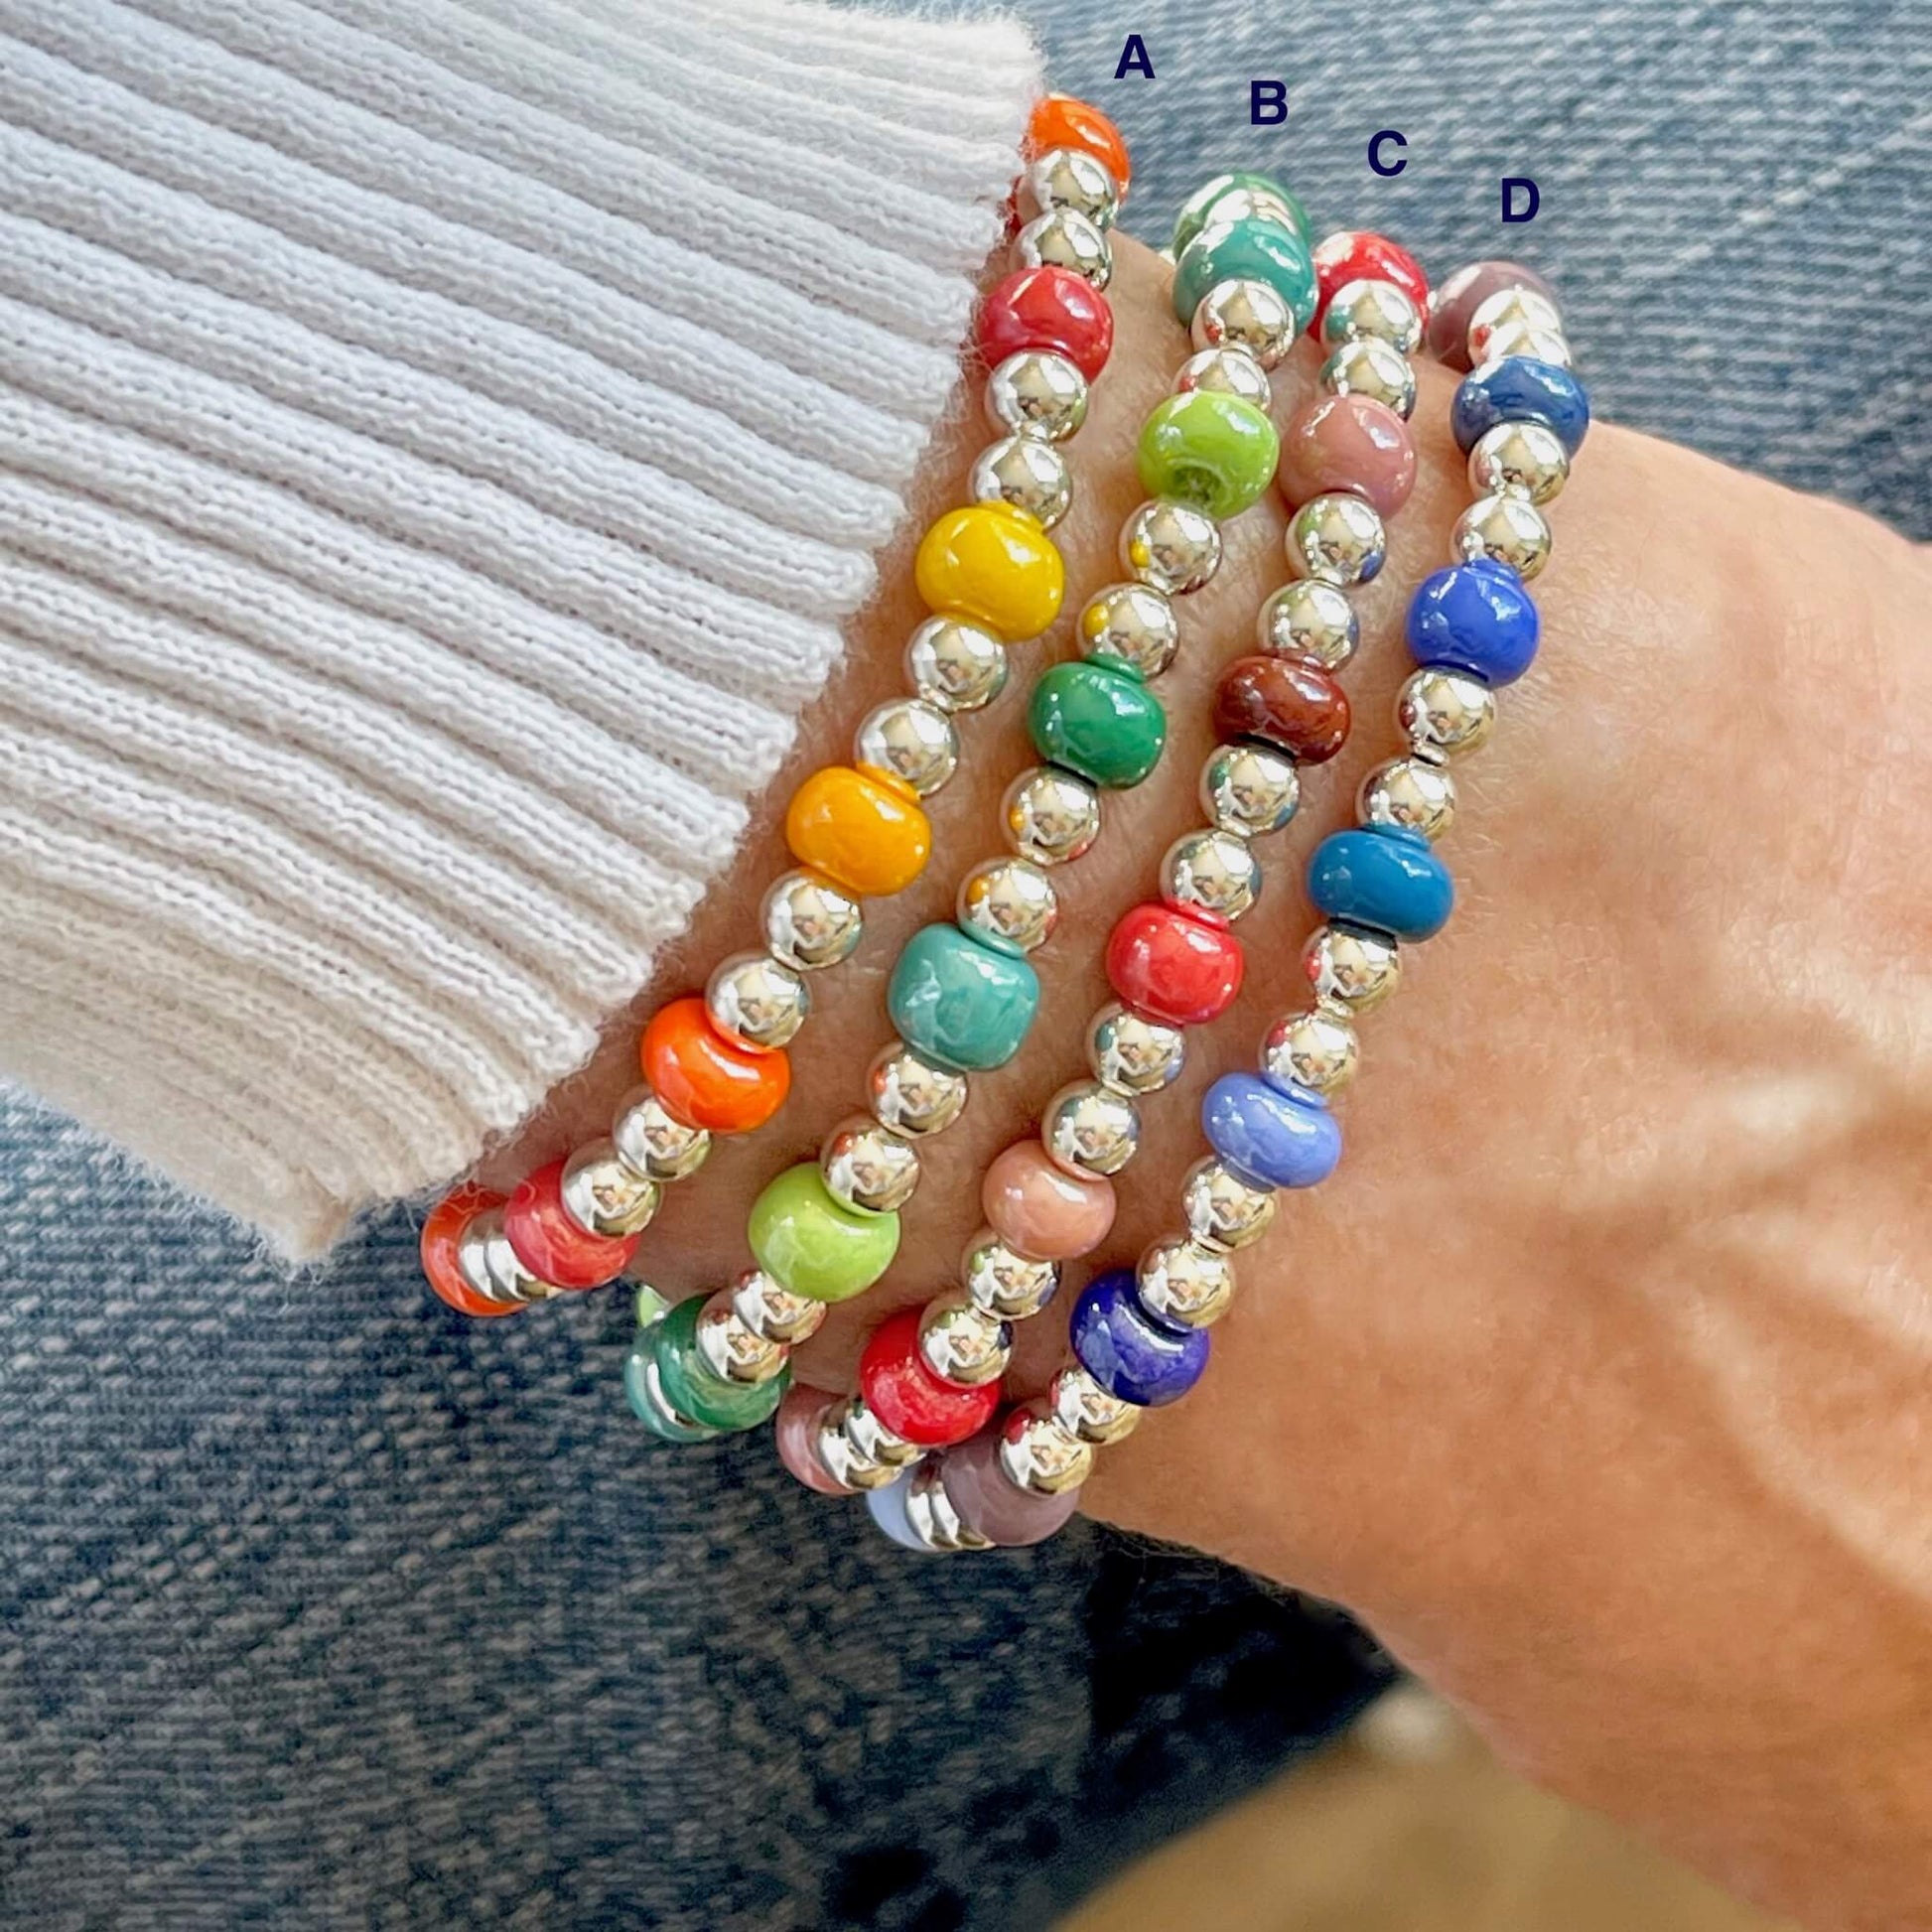 Sterling silver beaded bracelets with bright monochromatic color mixes of glass beads in reds, oranges, greens, and blues.